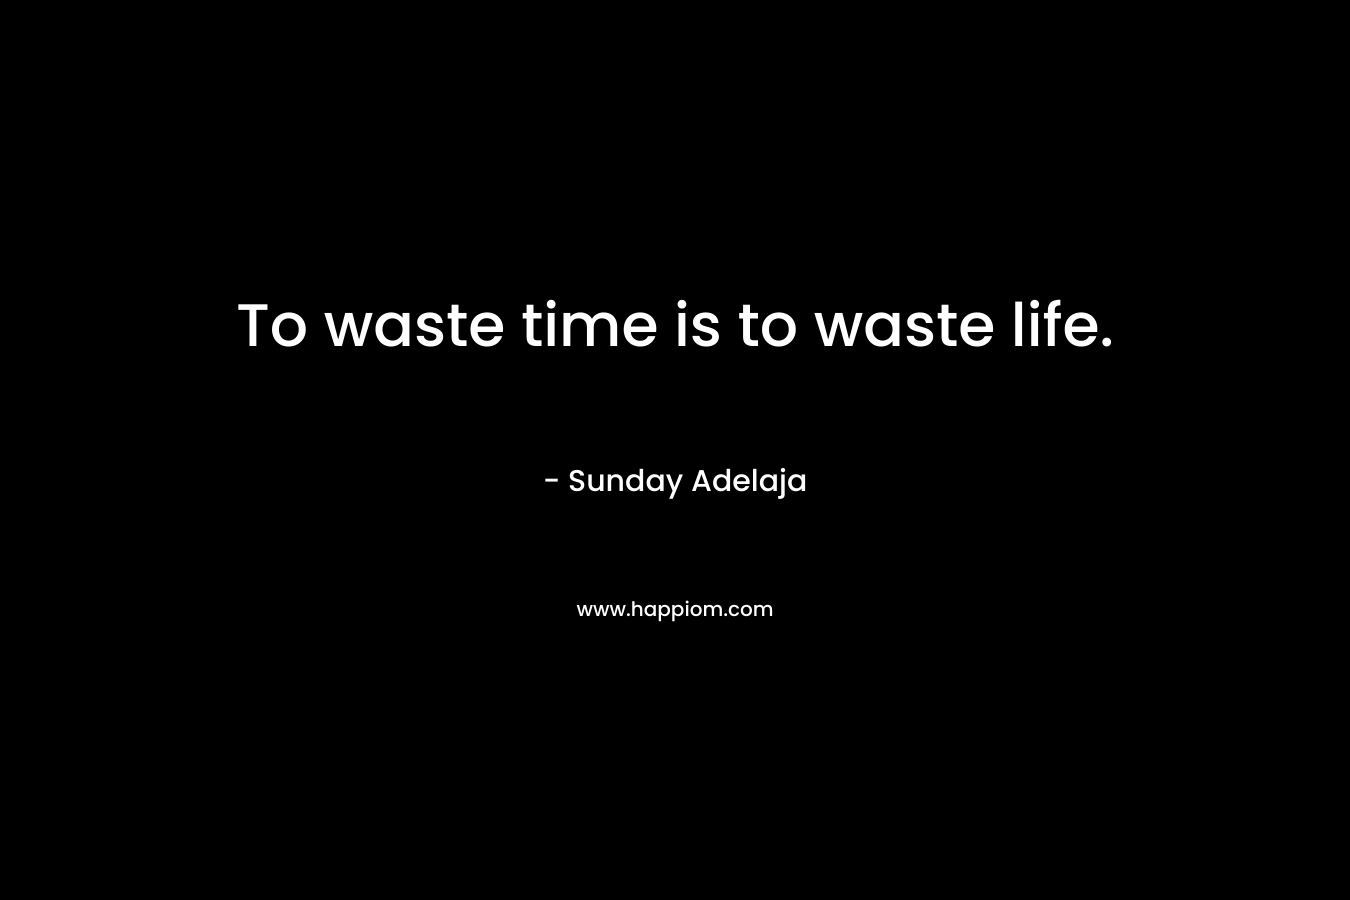 To waste time is to waste life.